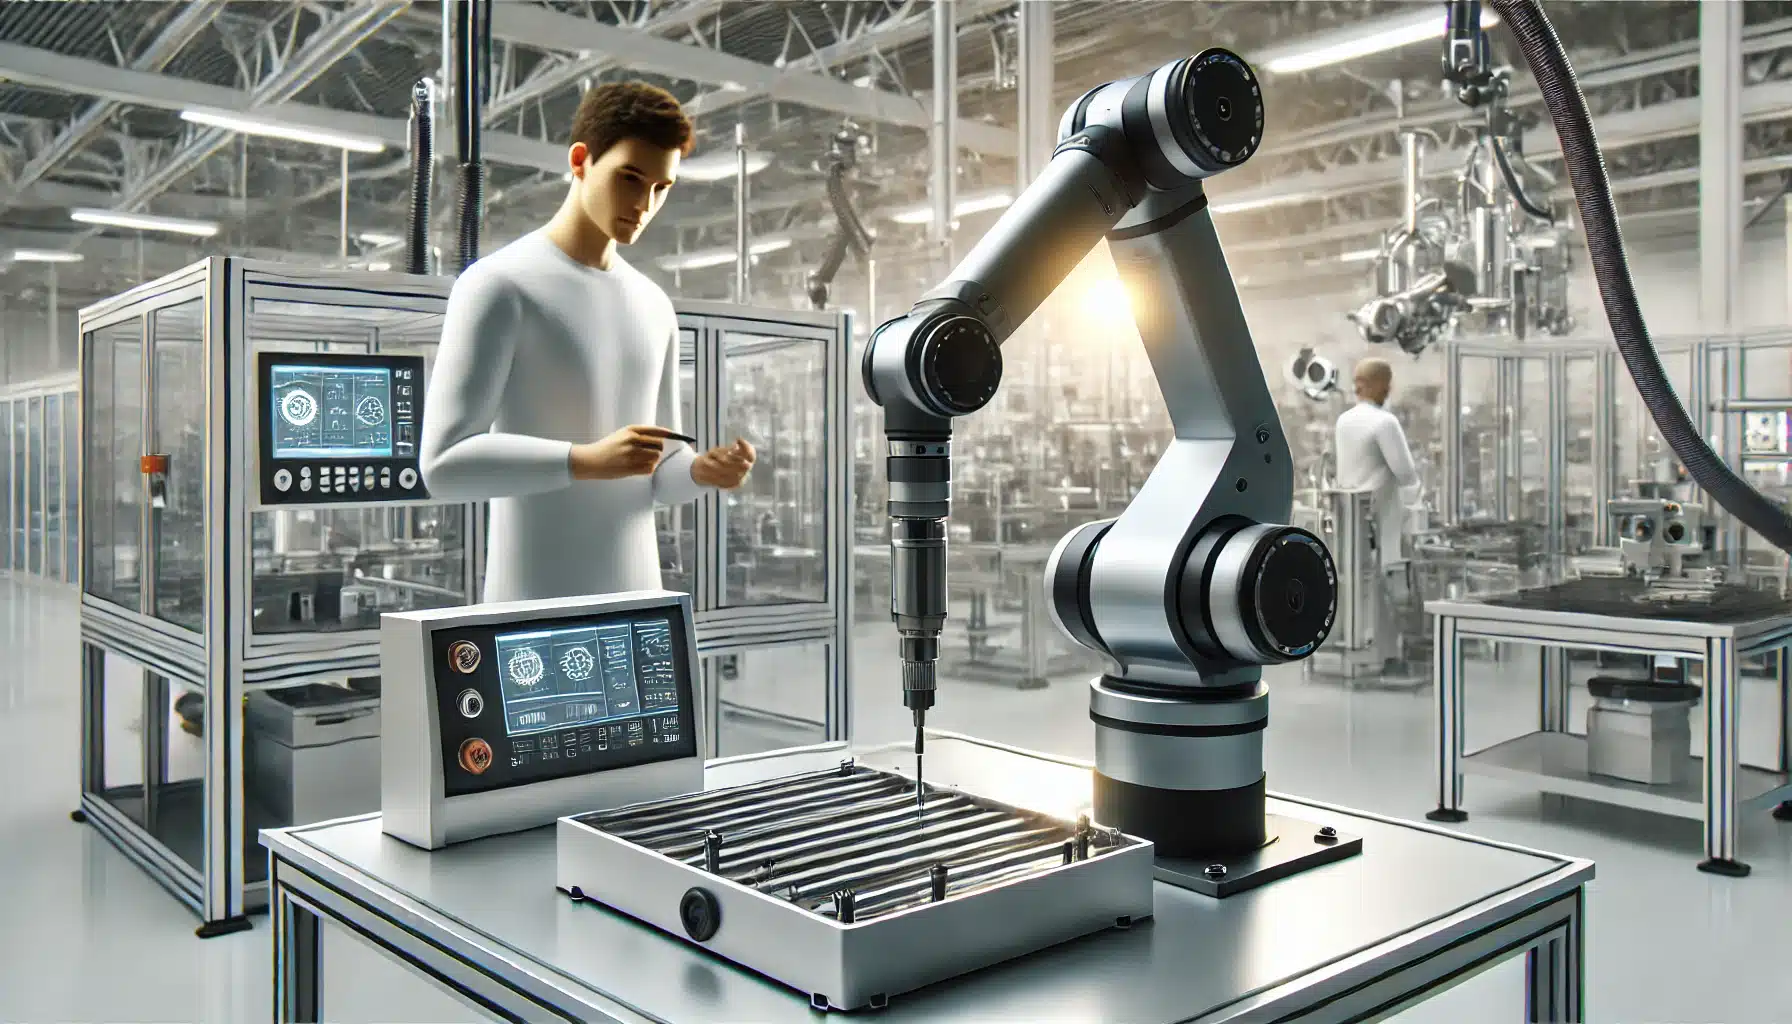 Cobot working alongside human in manufacturing setting